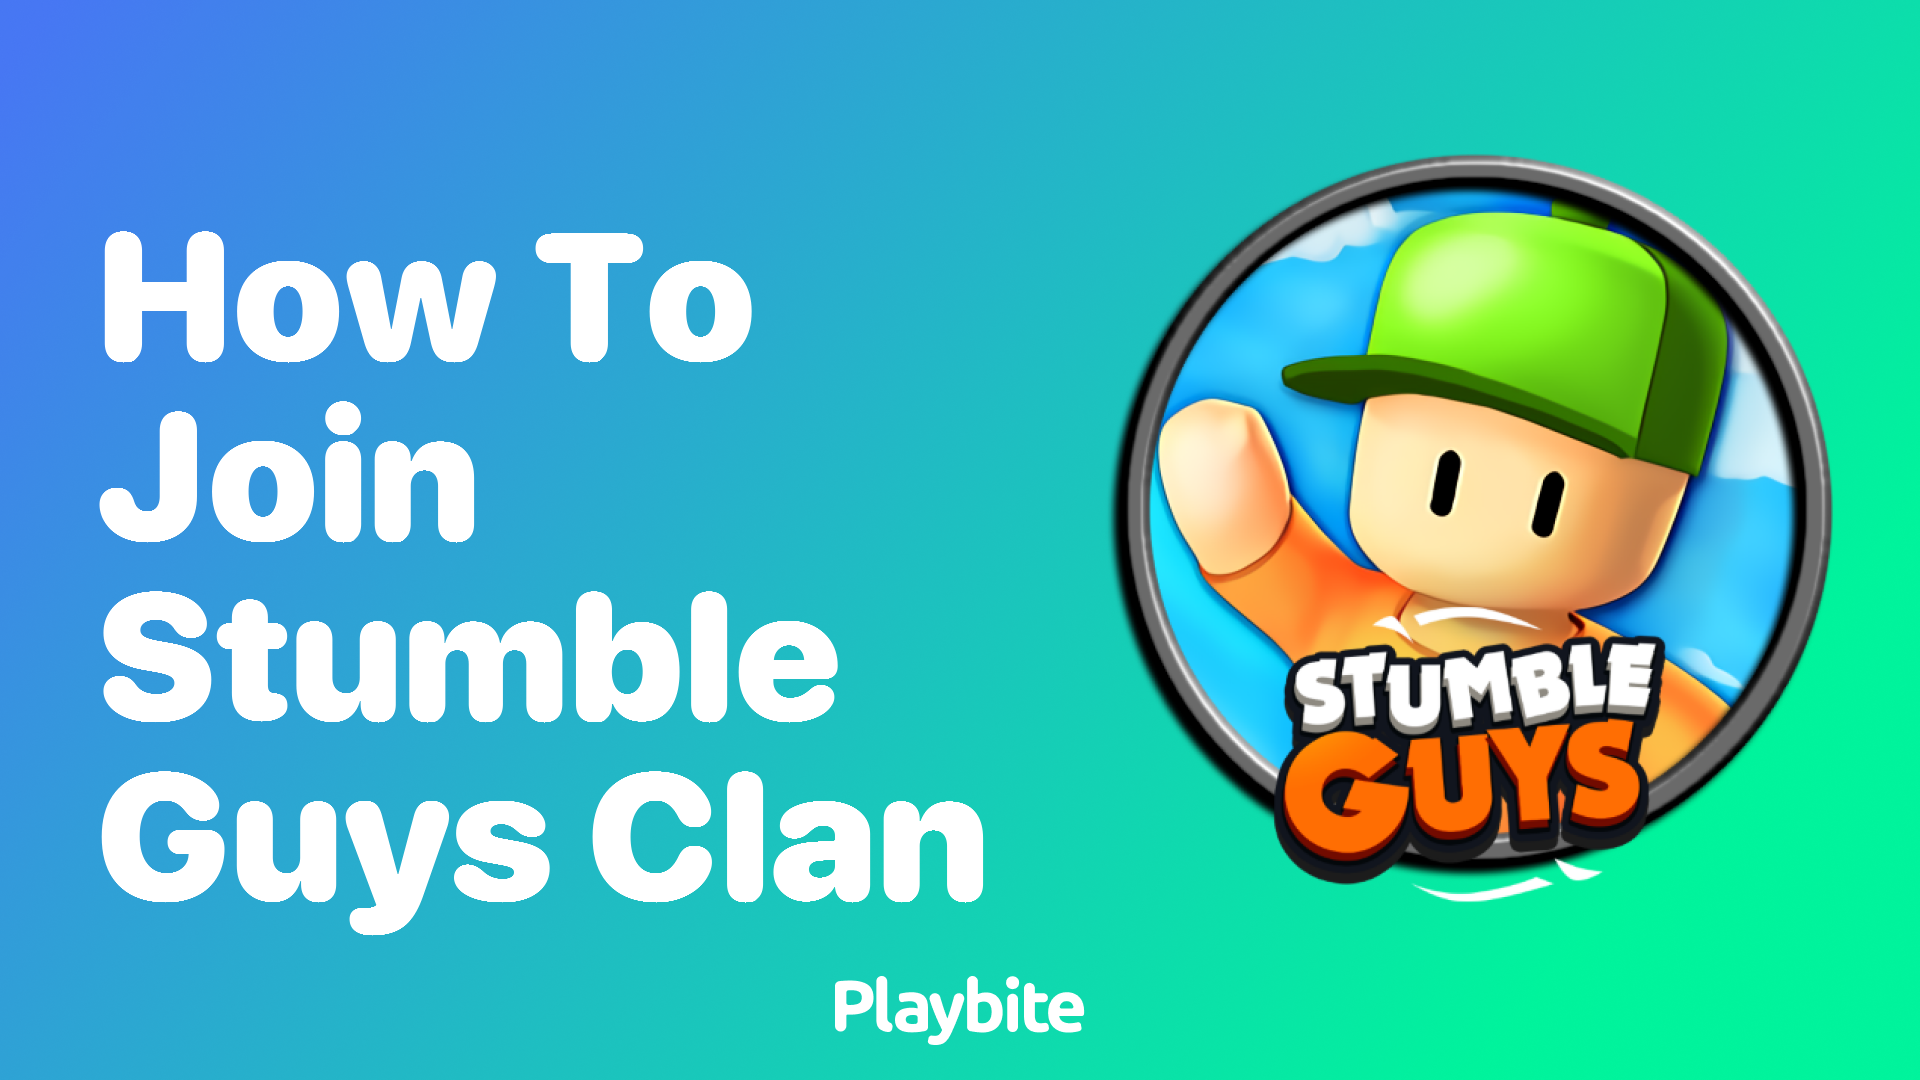 How to Join a Stumble Guys Clan: A Simple Guide